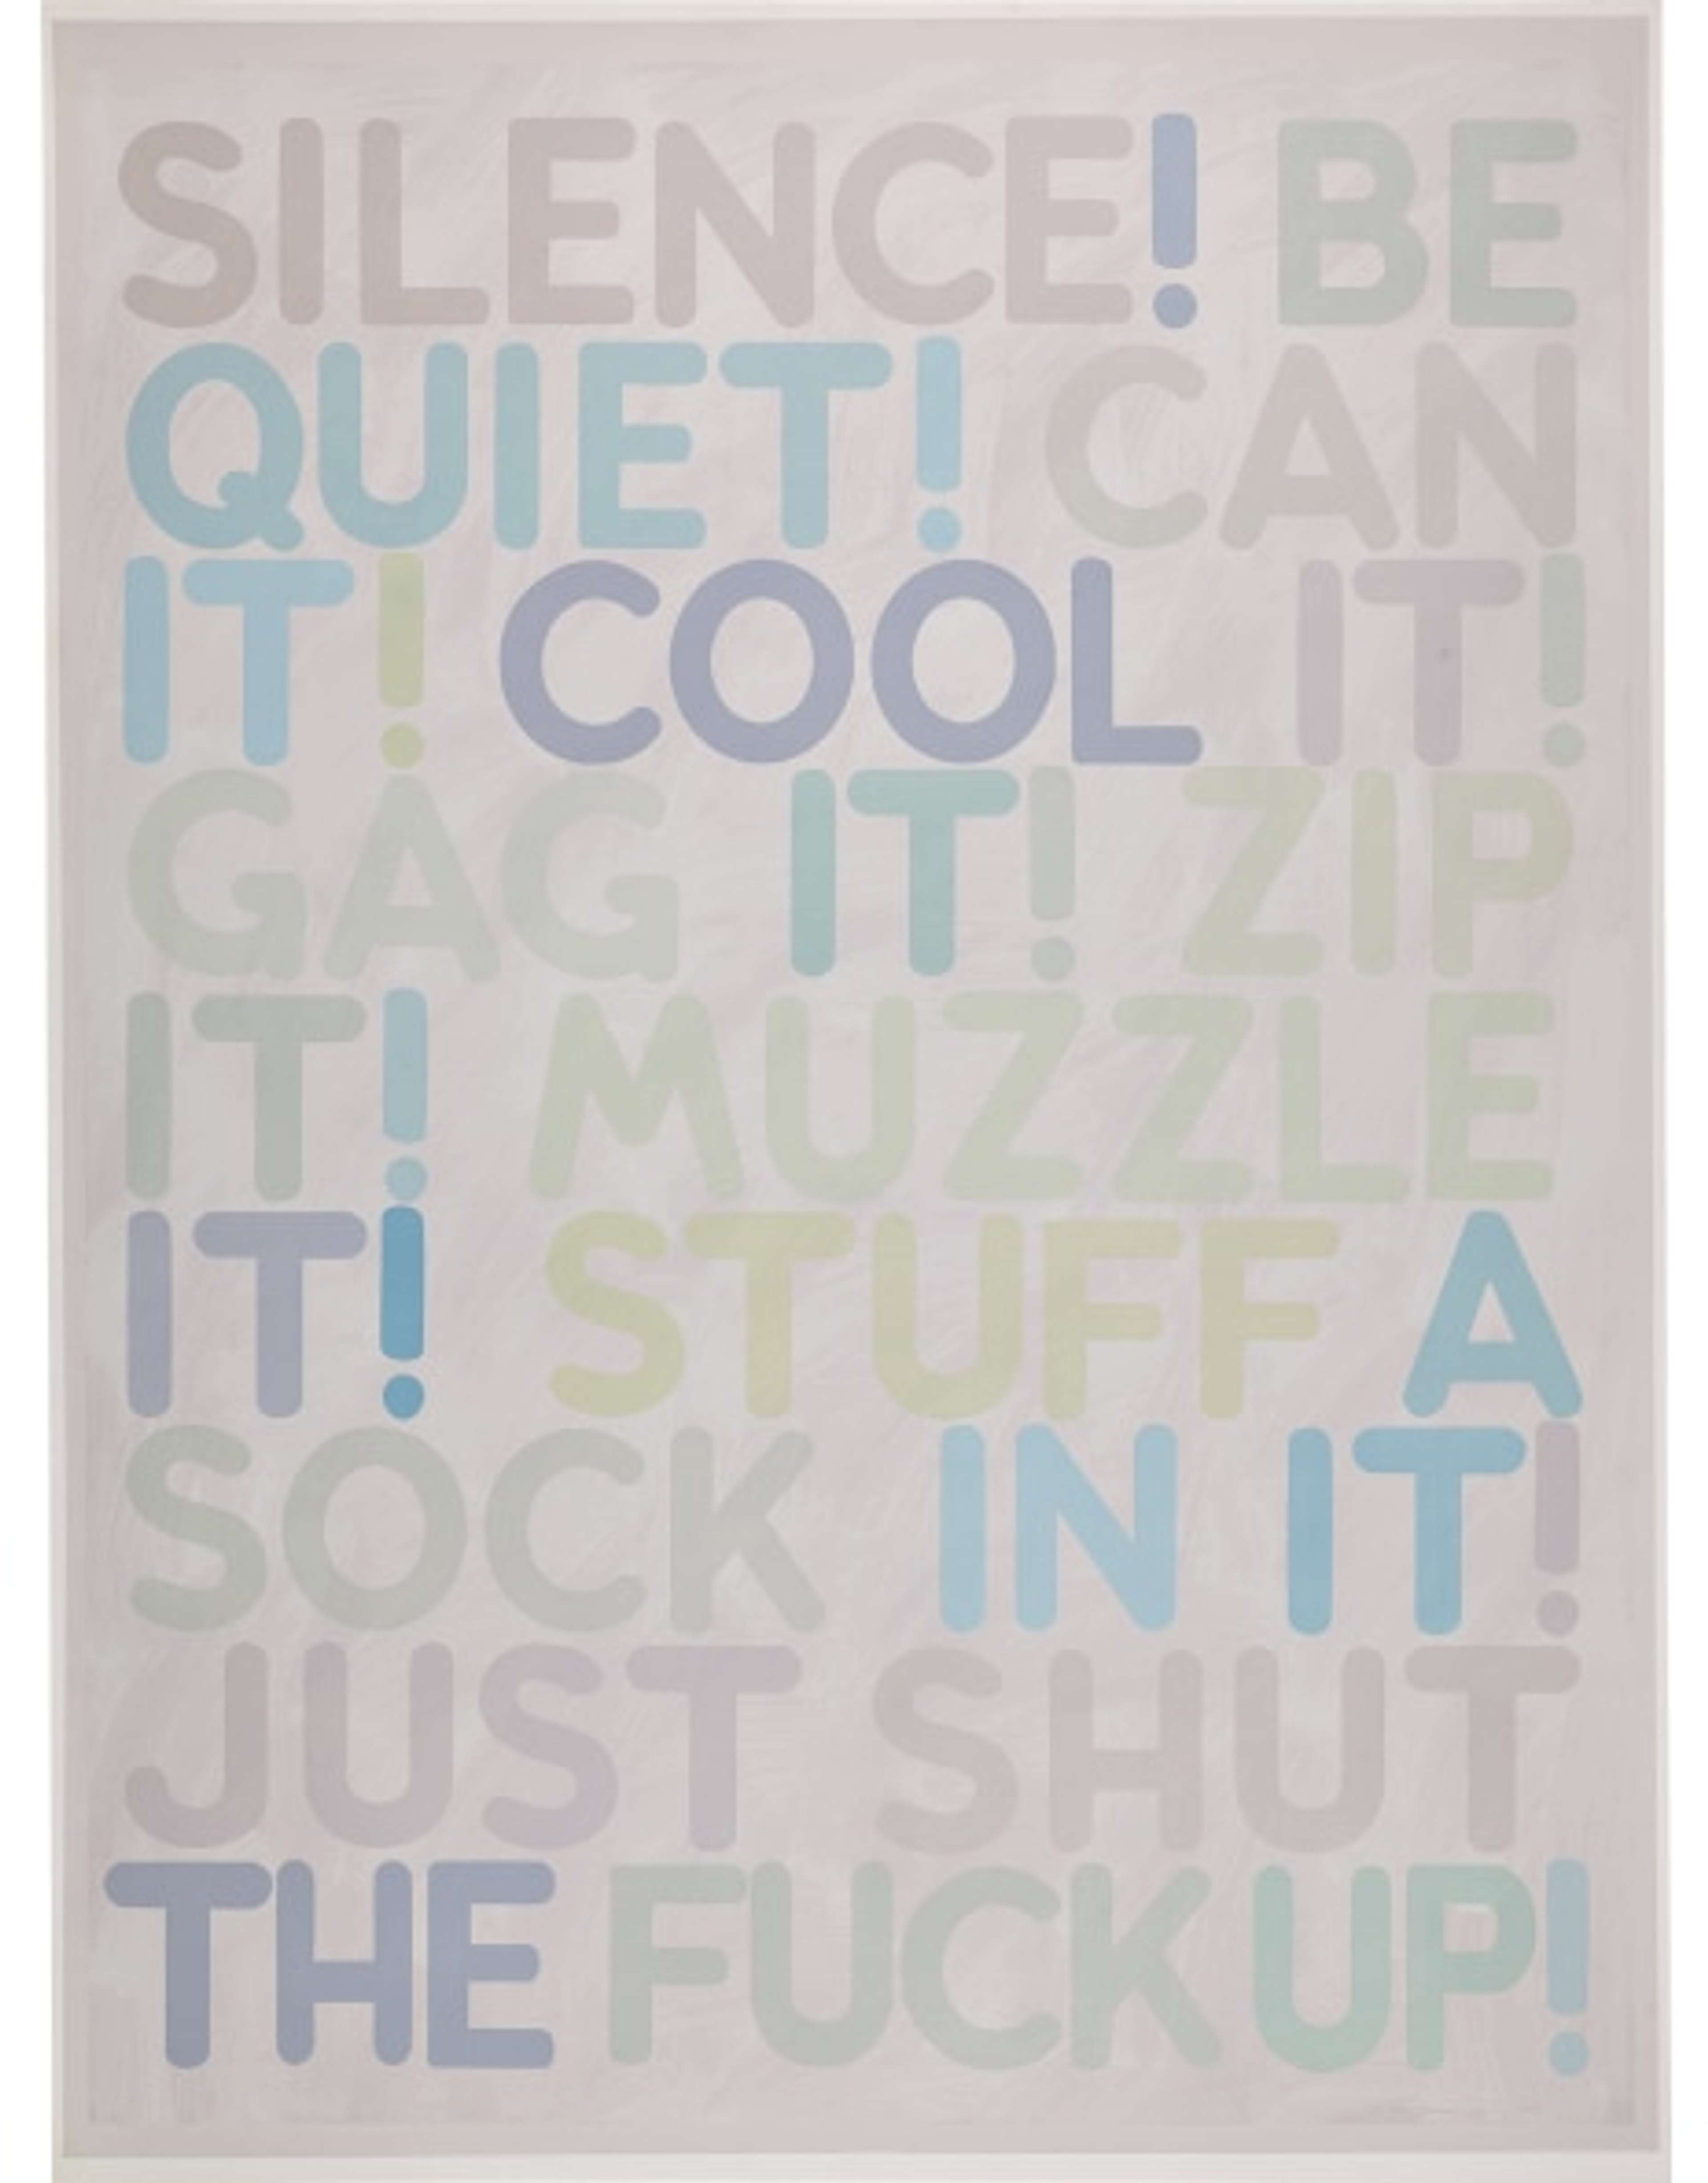 A textual artwork with a white background featuring pastel-colored stenciled words in all capitals. The phrases include "SILENCE! BE QUIET! CAN IT! COOL IT" and more.